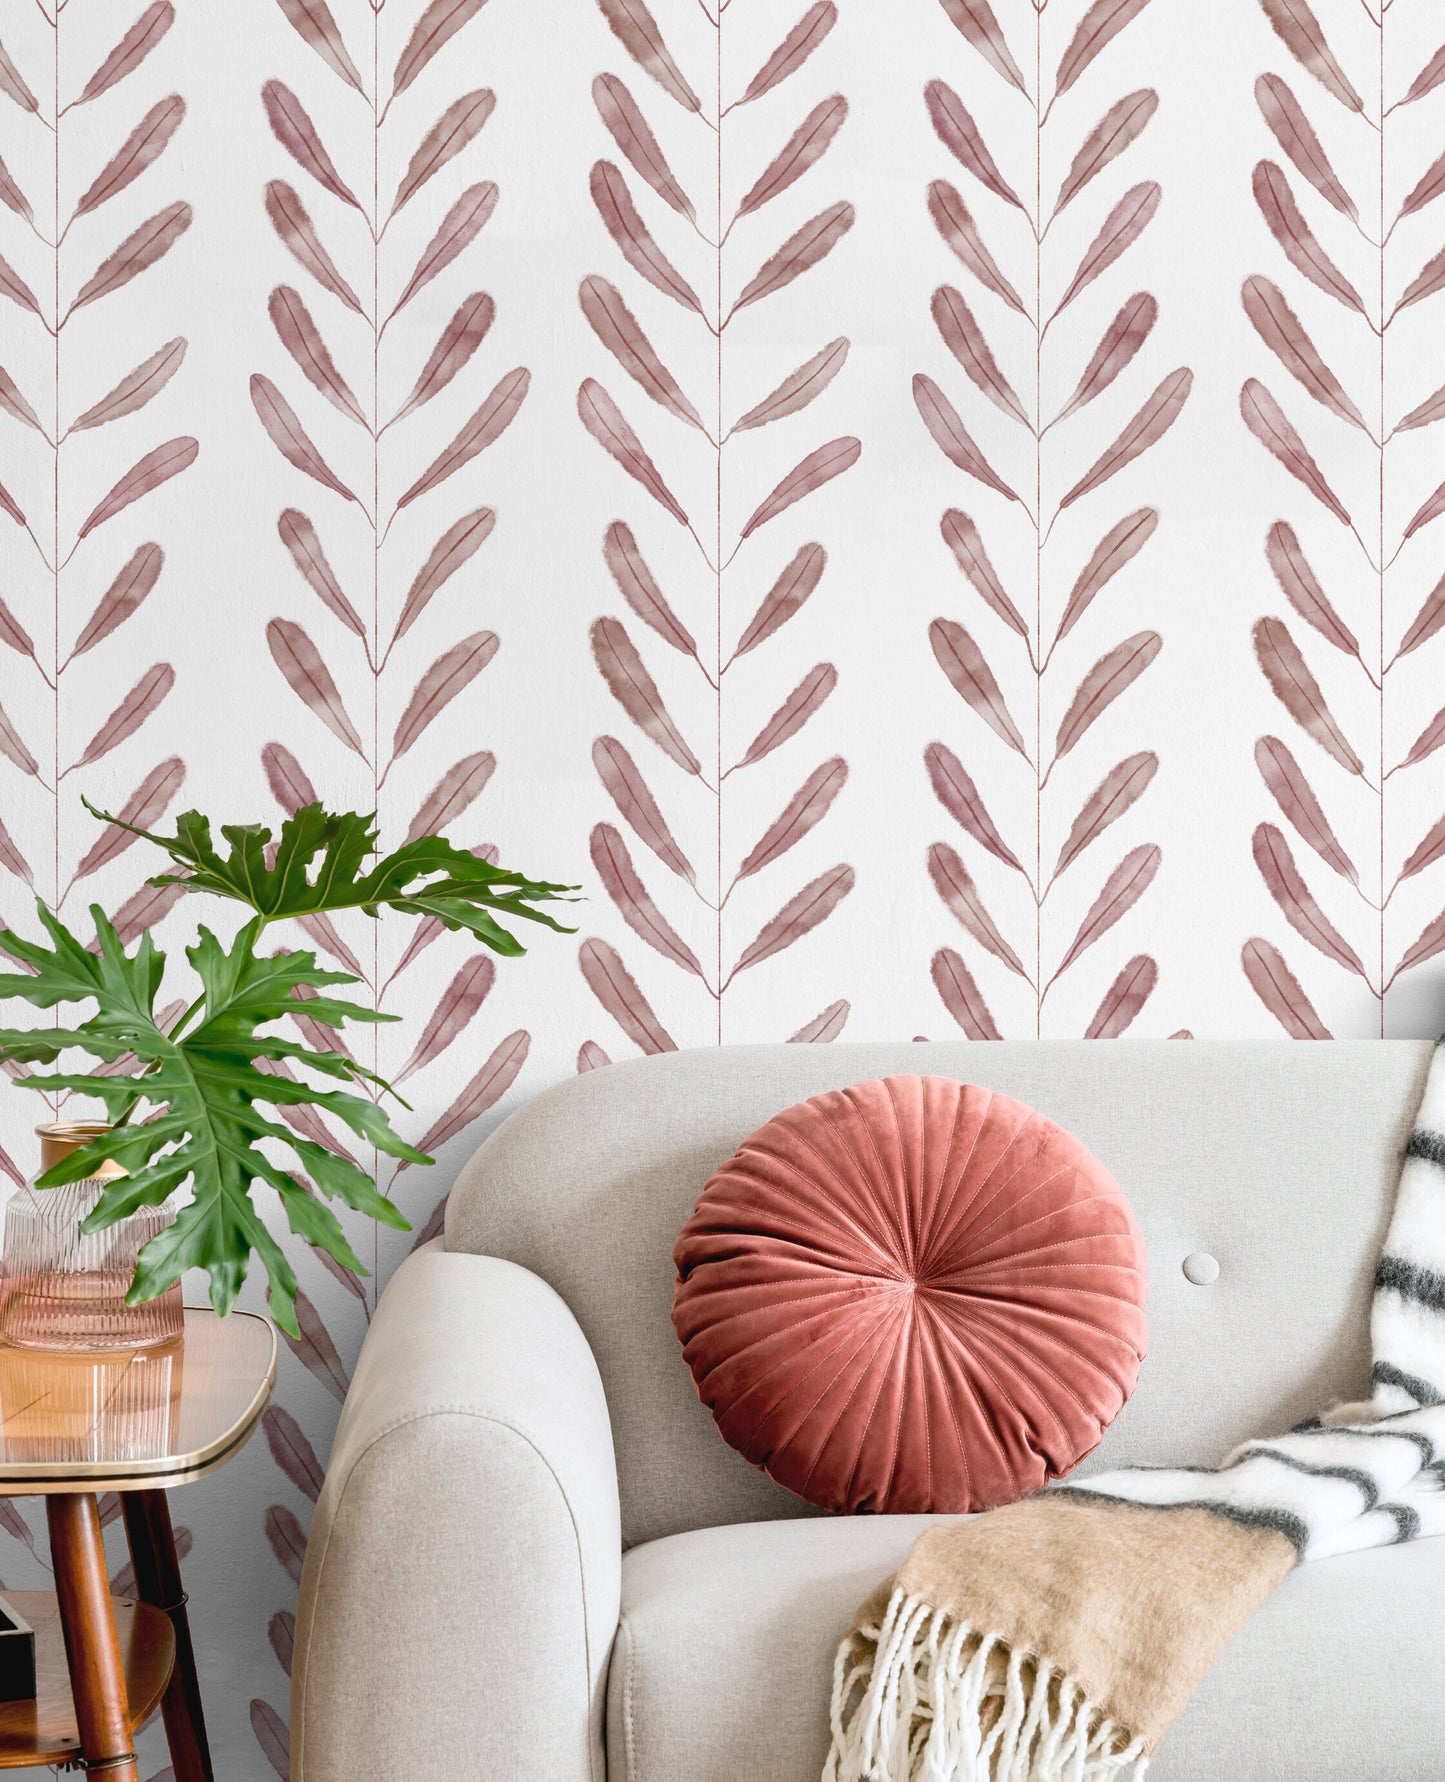 Peel and Stick Wallpaper Removable Wallpaper Wall Decor Home Decor Wall Art Printable Wall / Rose Color Leaf Wallpaper - X134